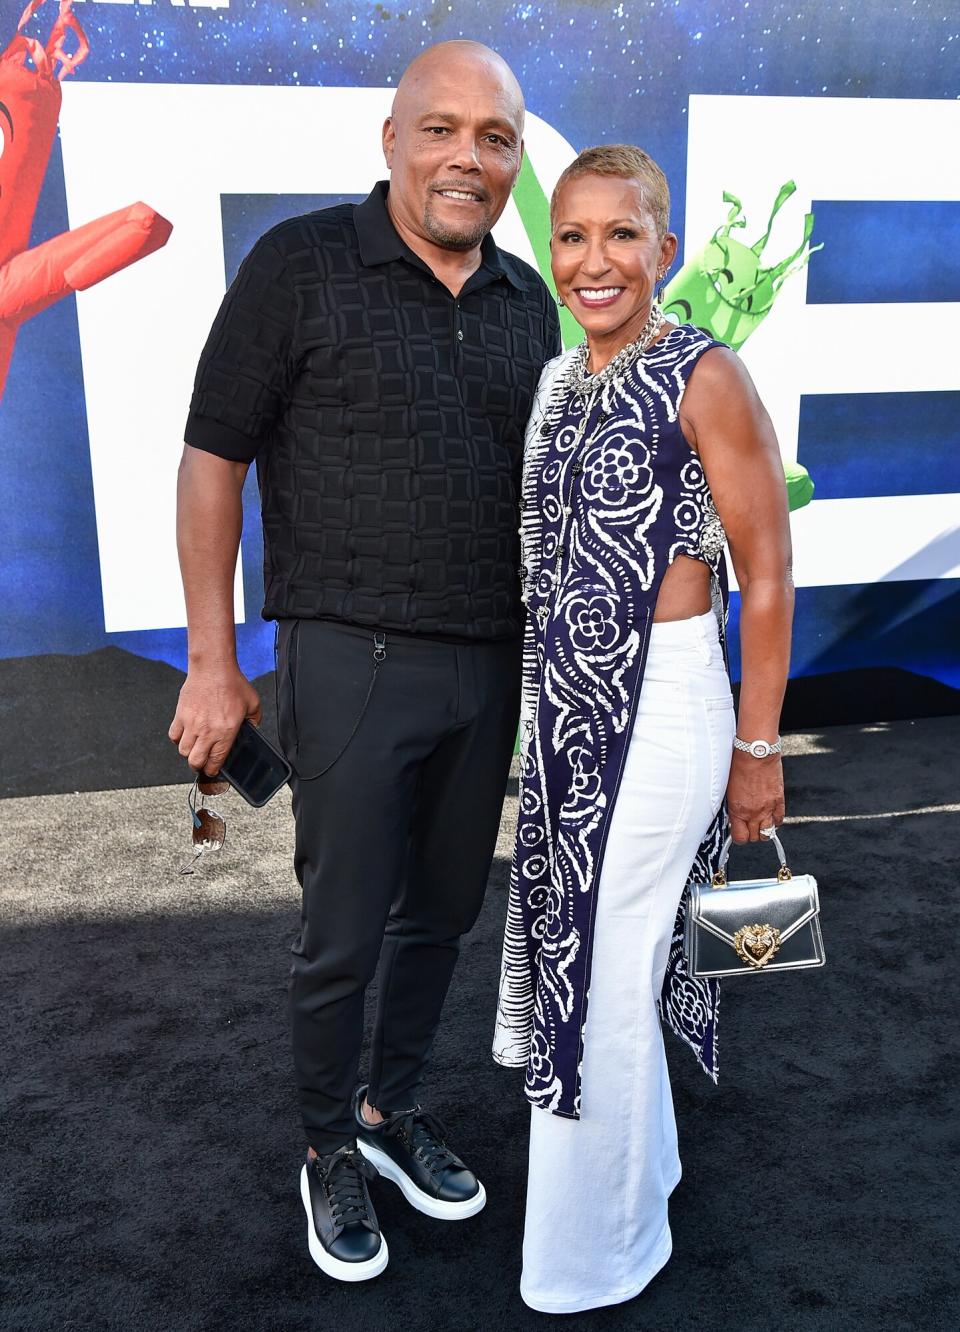 Adrienne Banfield-Norris and Rodney Norris attend the world premiere of Universal Pictures' "NOPE" at TCL Chinese Theatre on July 18, 2022 in Hollywood, California.